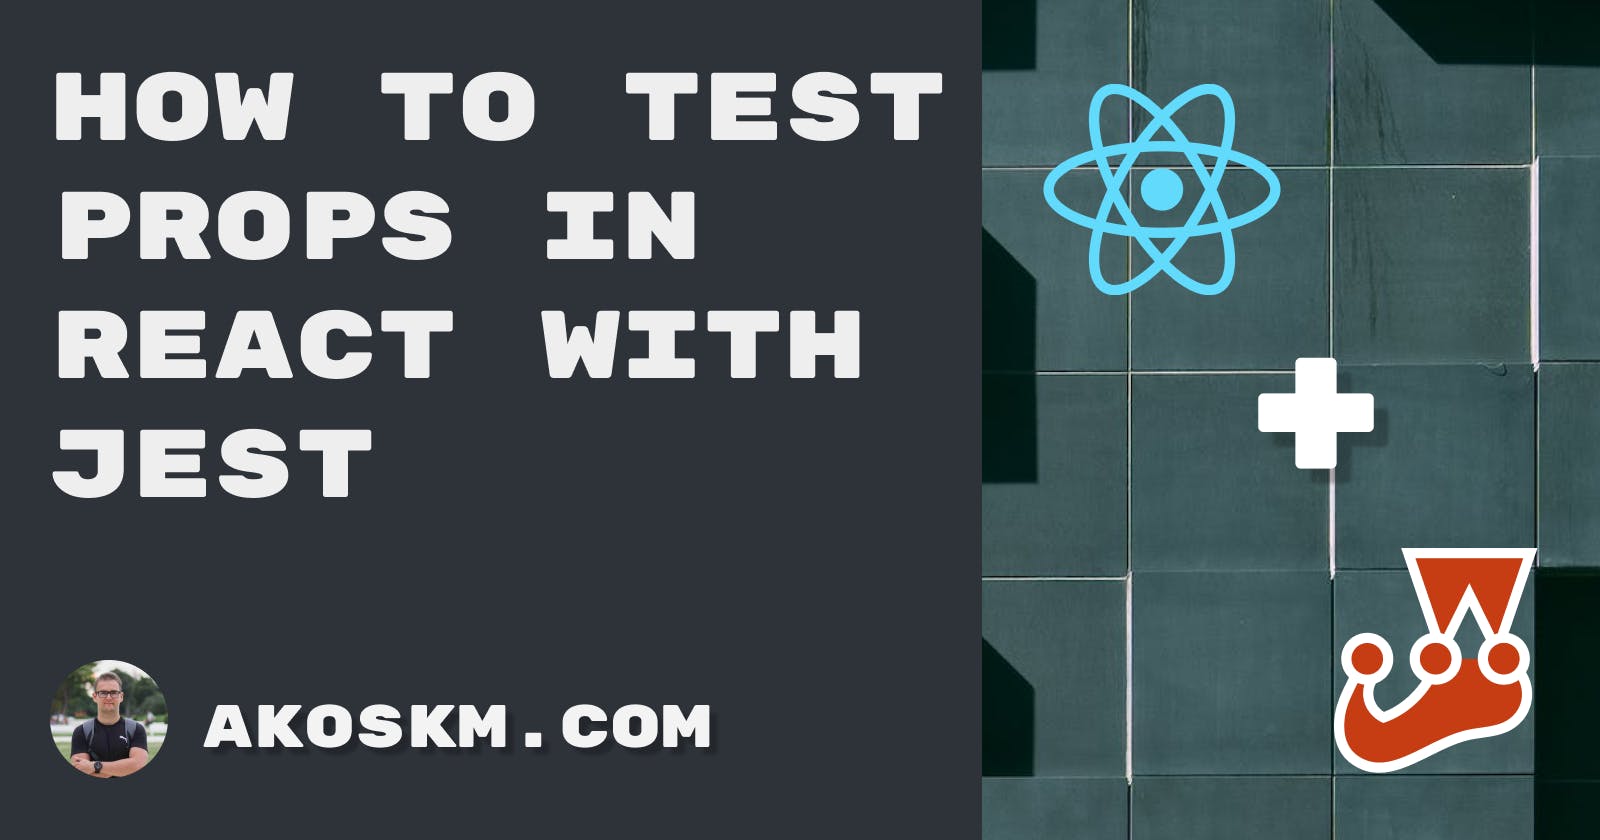 How to Test Props in React with Jest